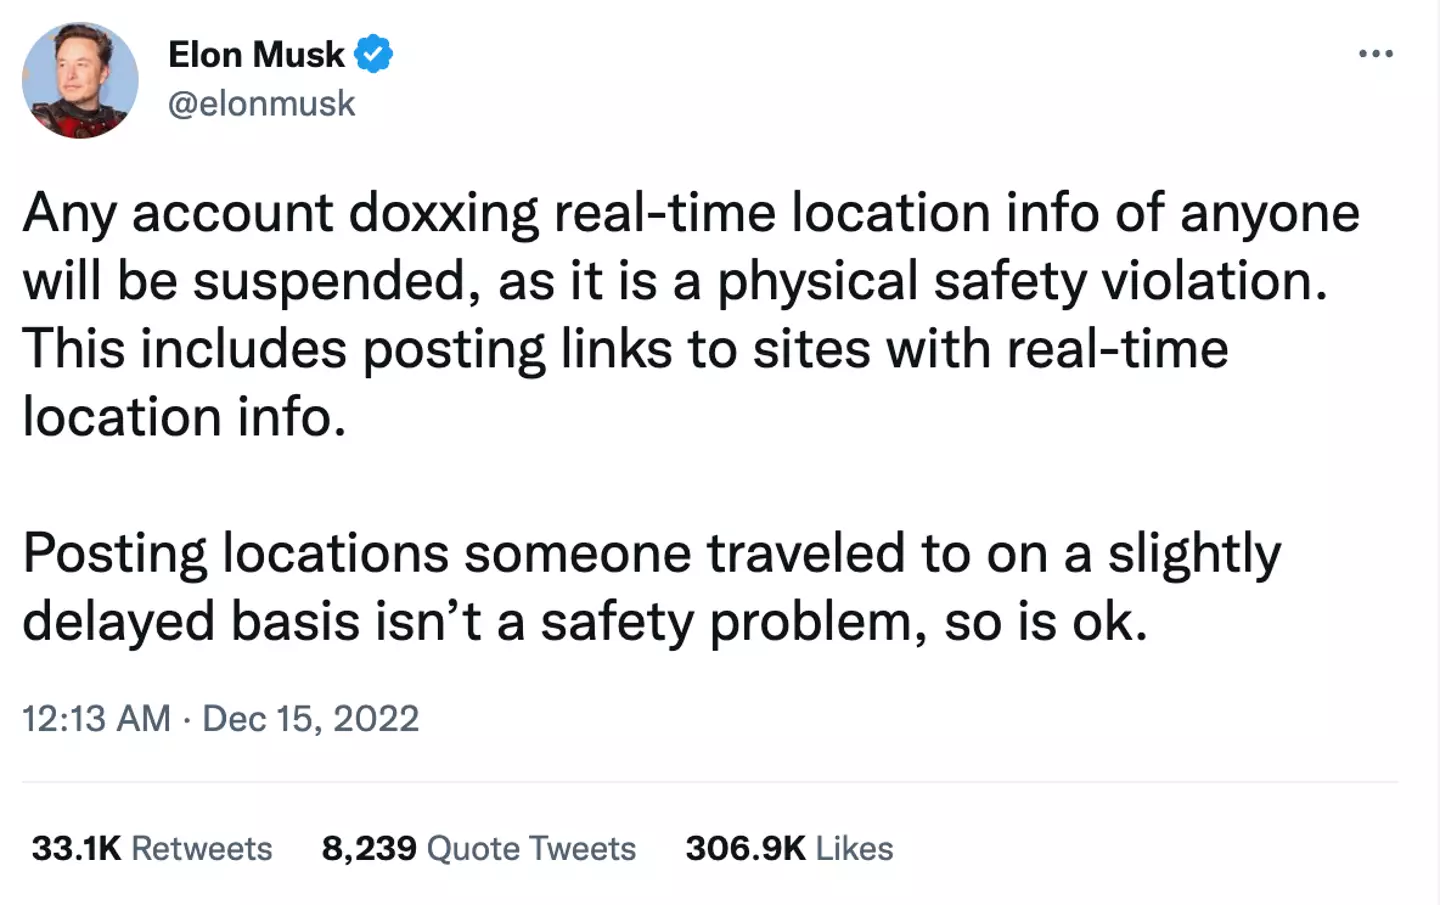 Elon Musk announced any Twitter accounts doxxing real-time location information will be suspended.